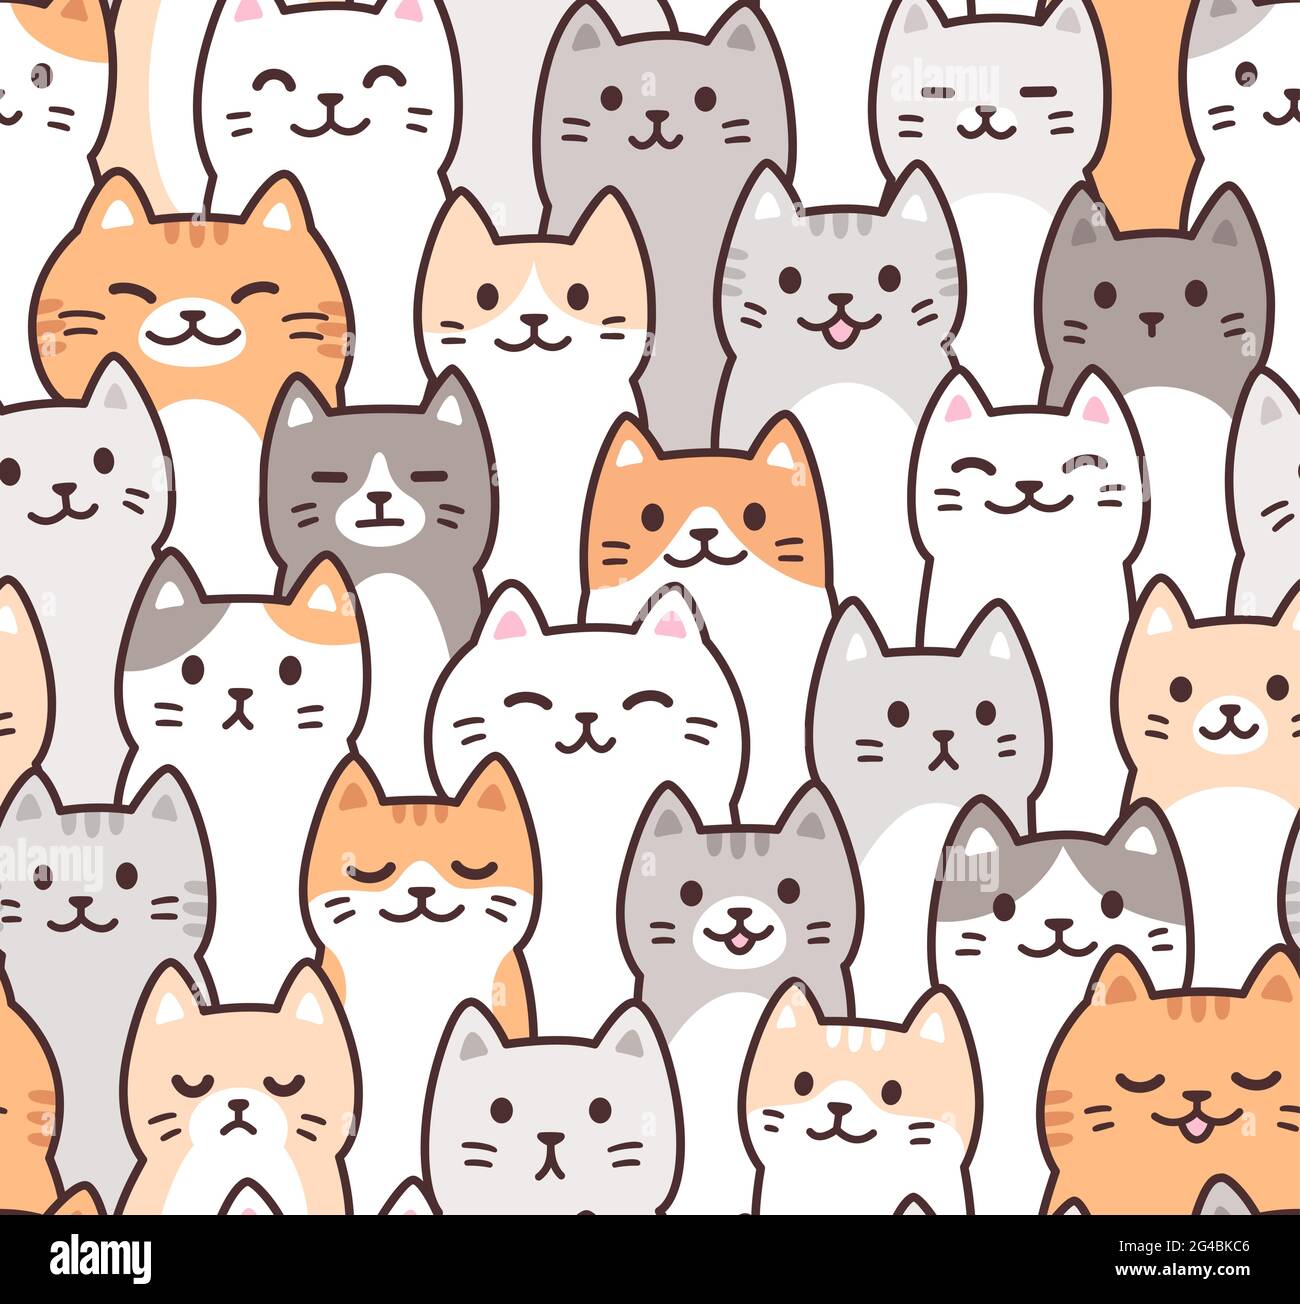 Cute cartoon doodle cats pattern. Kawaii crowd of cat faces. Seamless background, vector illustration. Stock Vector